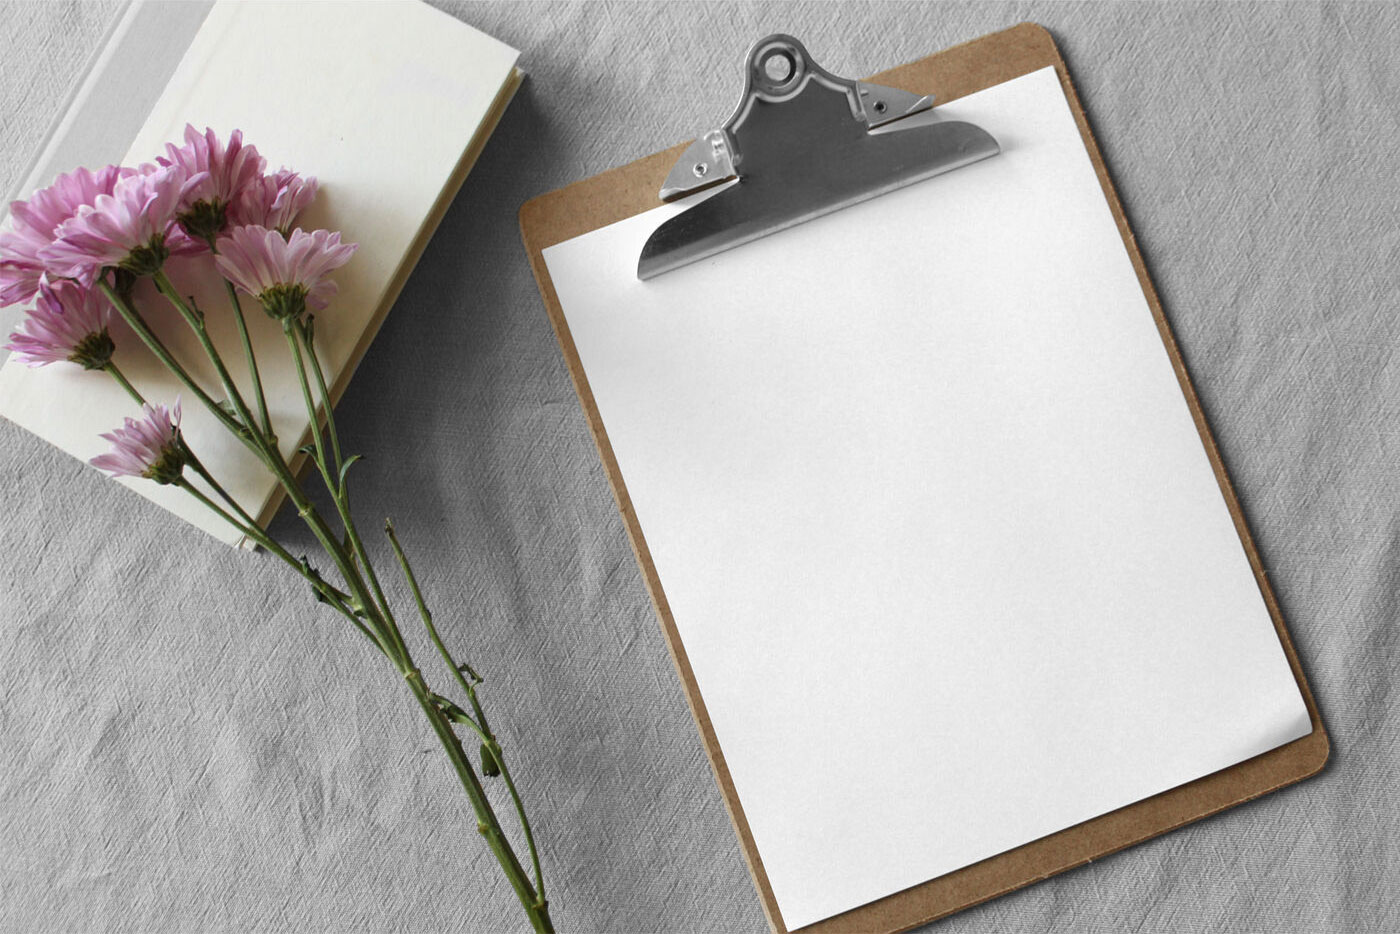 Paper Clipboard Mockup Along With Flowers FREE PSD